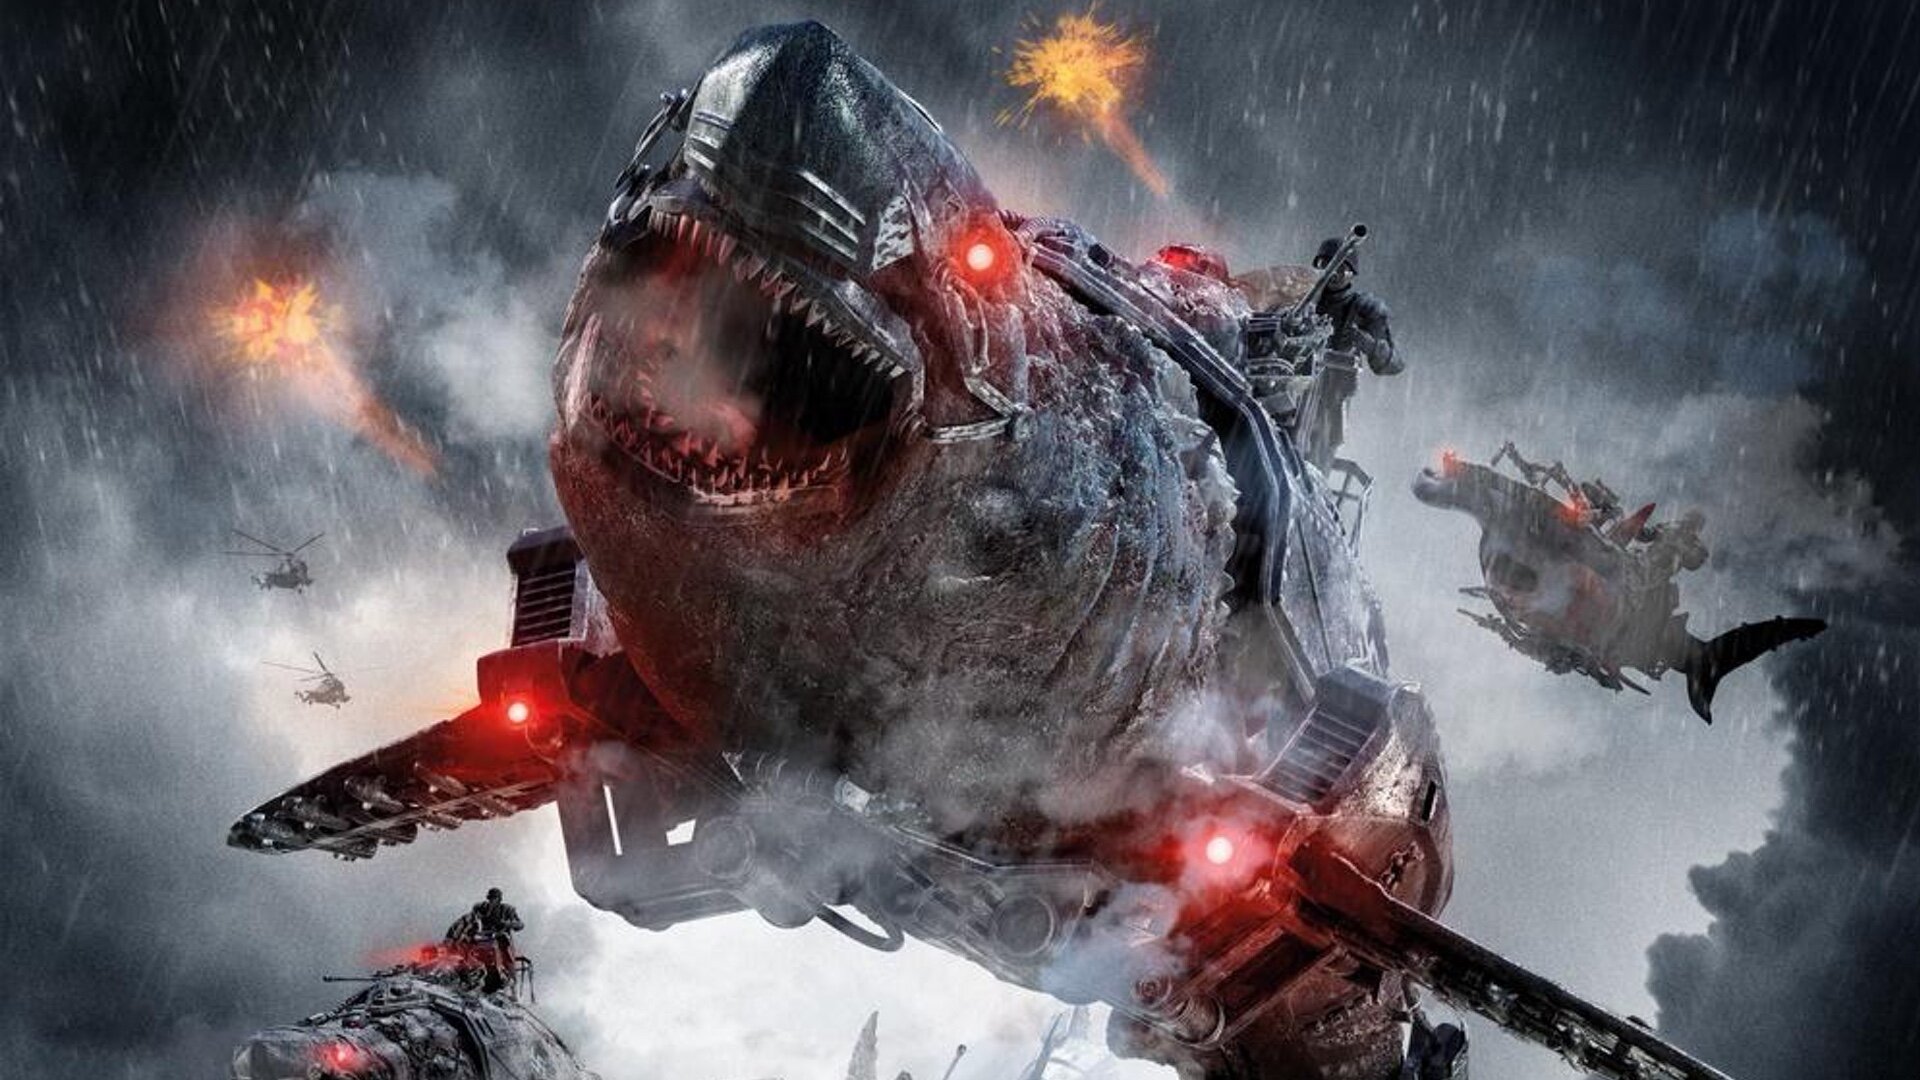 Radically Ridiculous Trailer for the Over the Top Action Film SKY SHARKS — GeekTyrant